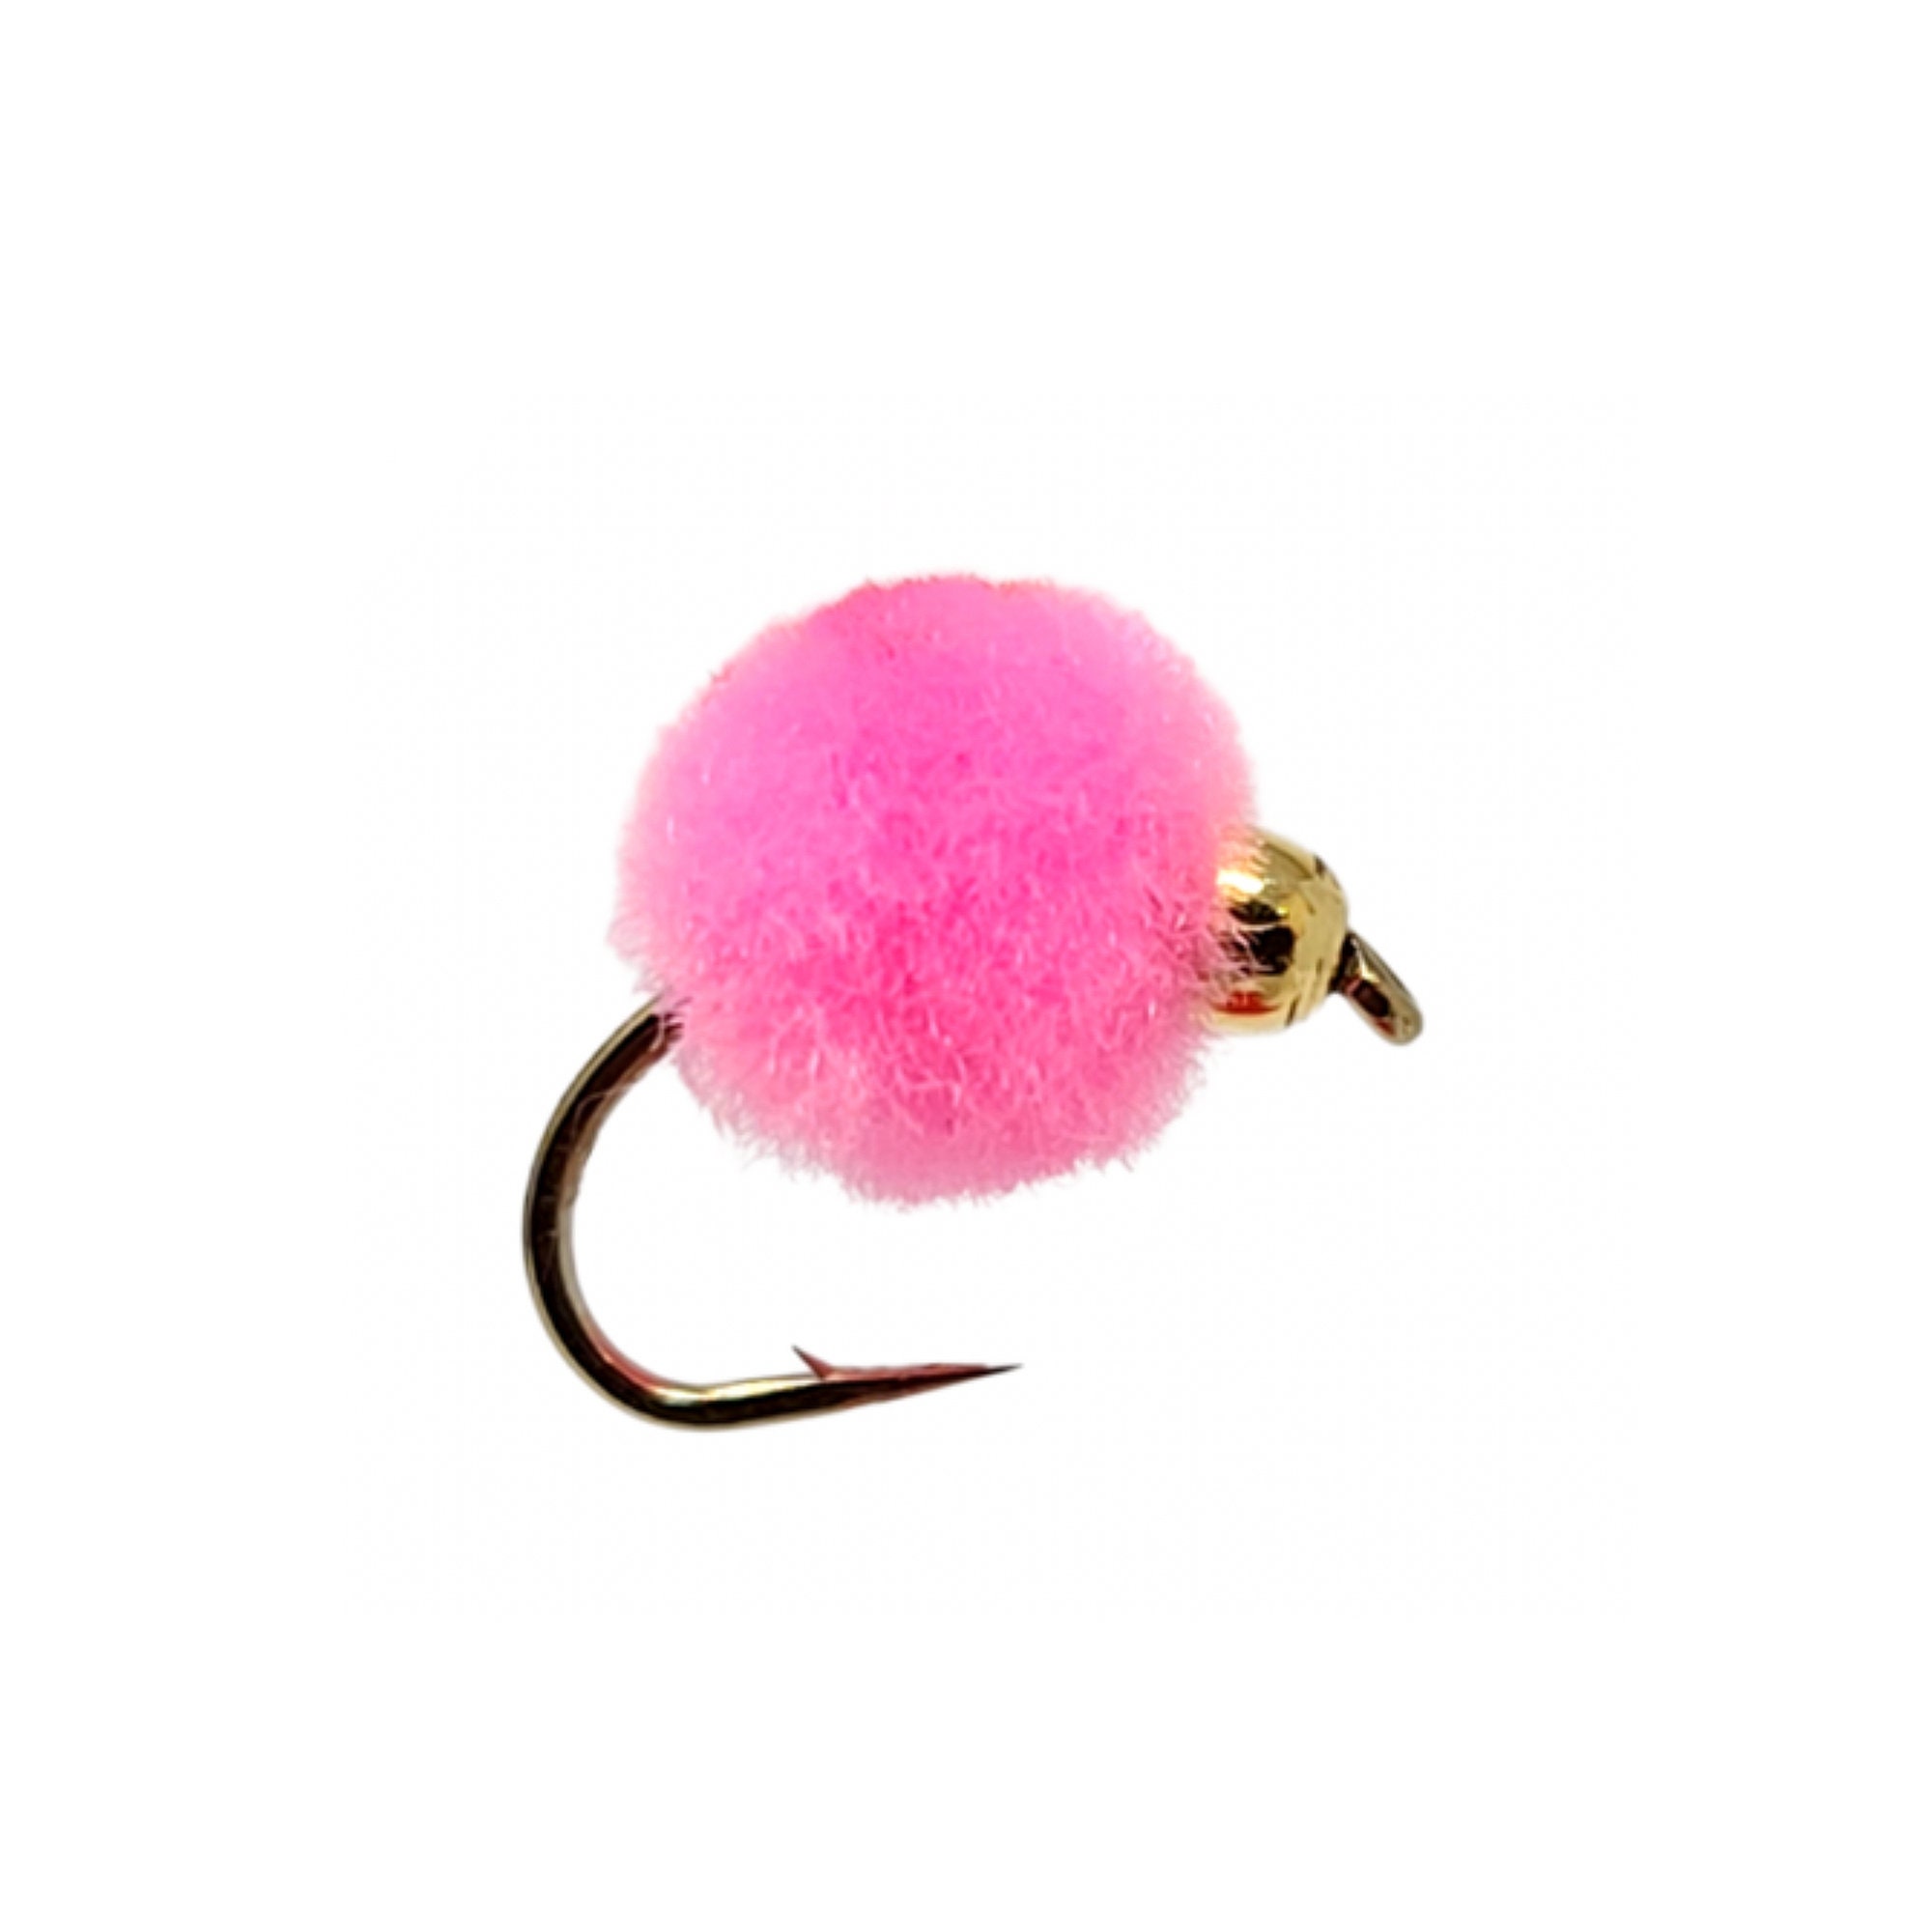 Glo-bug / Egg Fly Pattern for Fly Fishing Fishing Lures for